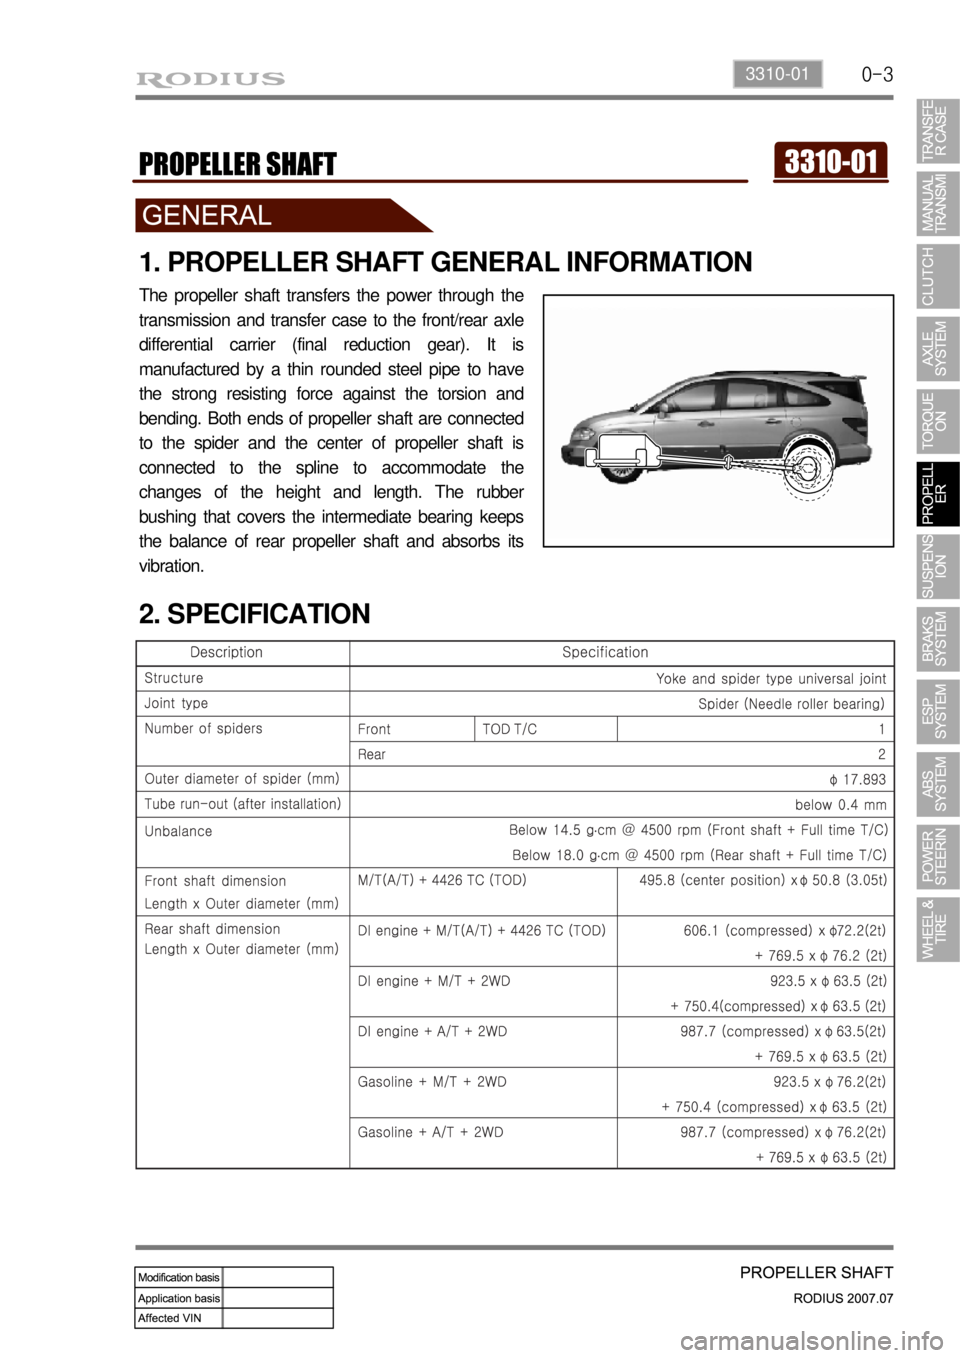 SSANGYONG RODIUS 2006  Service Manual 0-33310-01
1. PROPELLER SHAFT GENERAL INFORMATION
The propeller shaft transfers the power through the 
transmission and transfer case to the front/rear axle 
differential carrier (final reduction gear